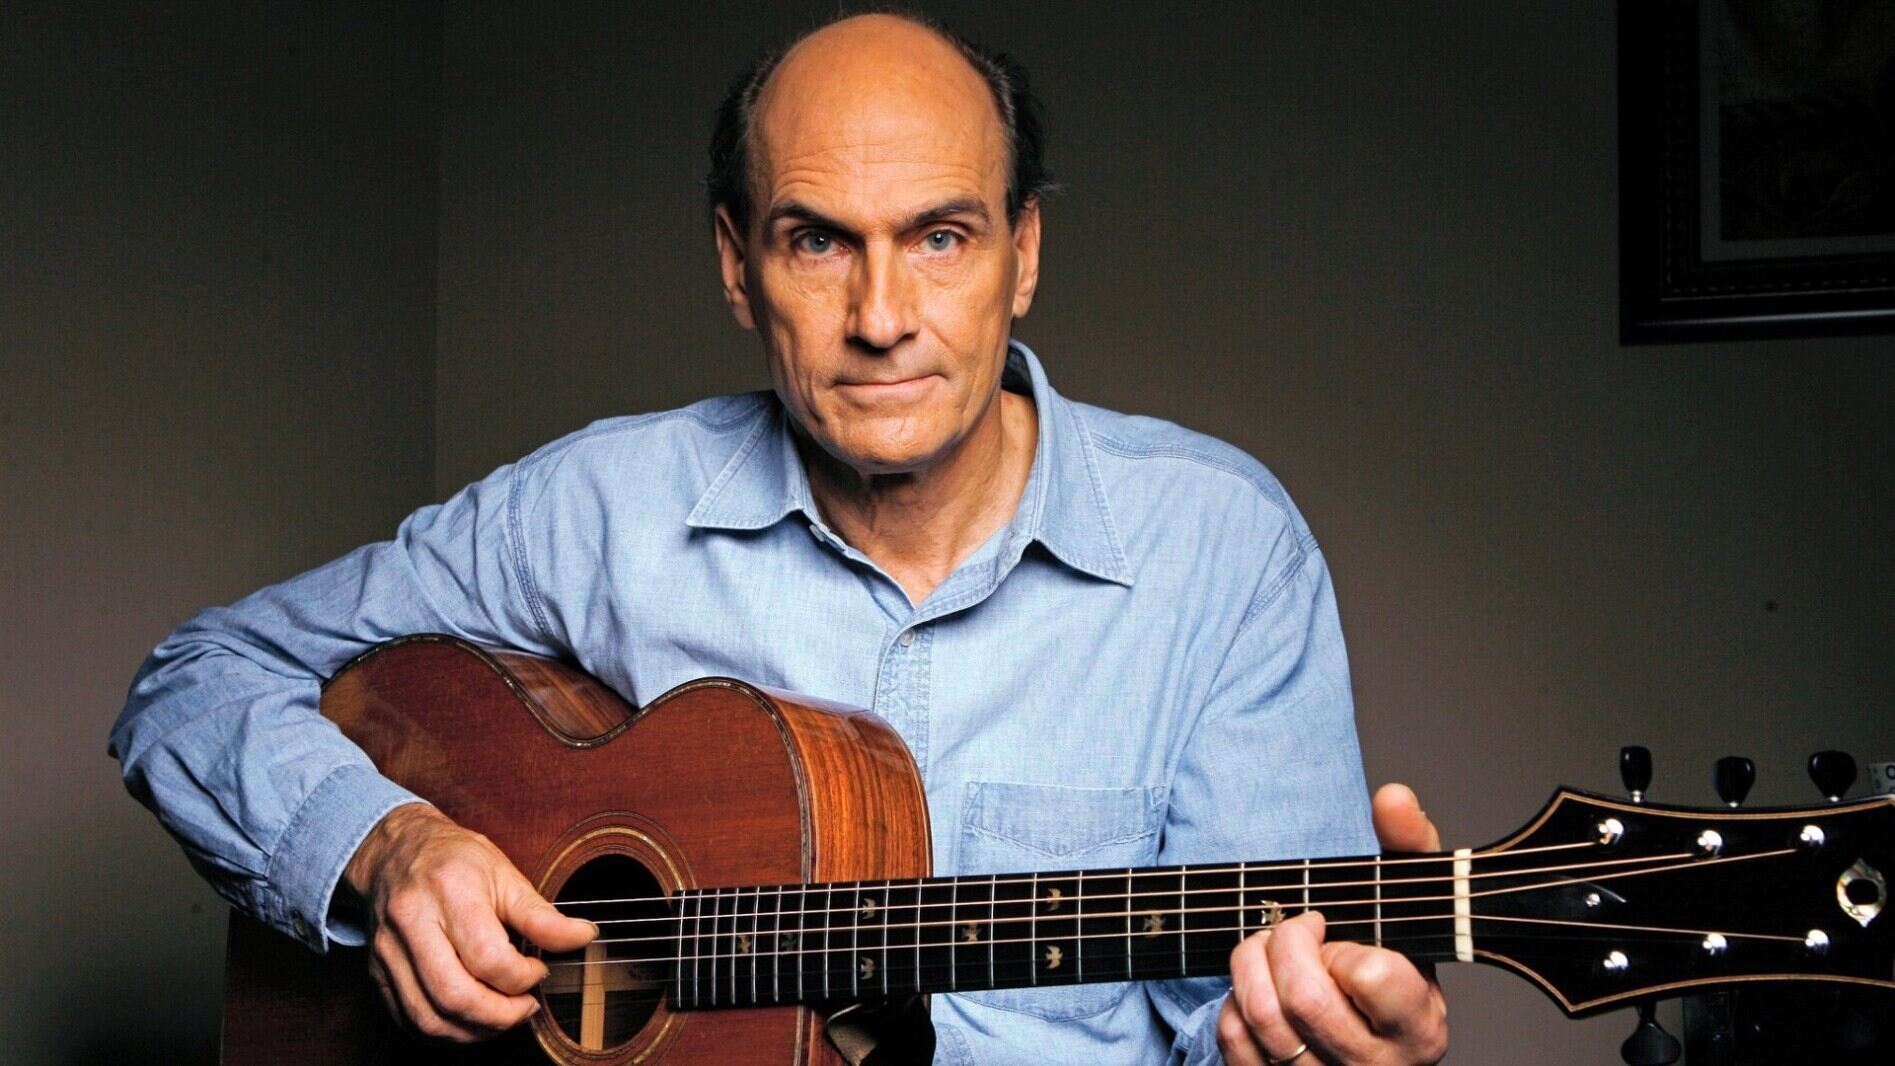 How Old Is James Taylor, The Singer